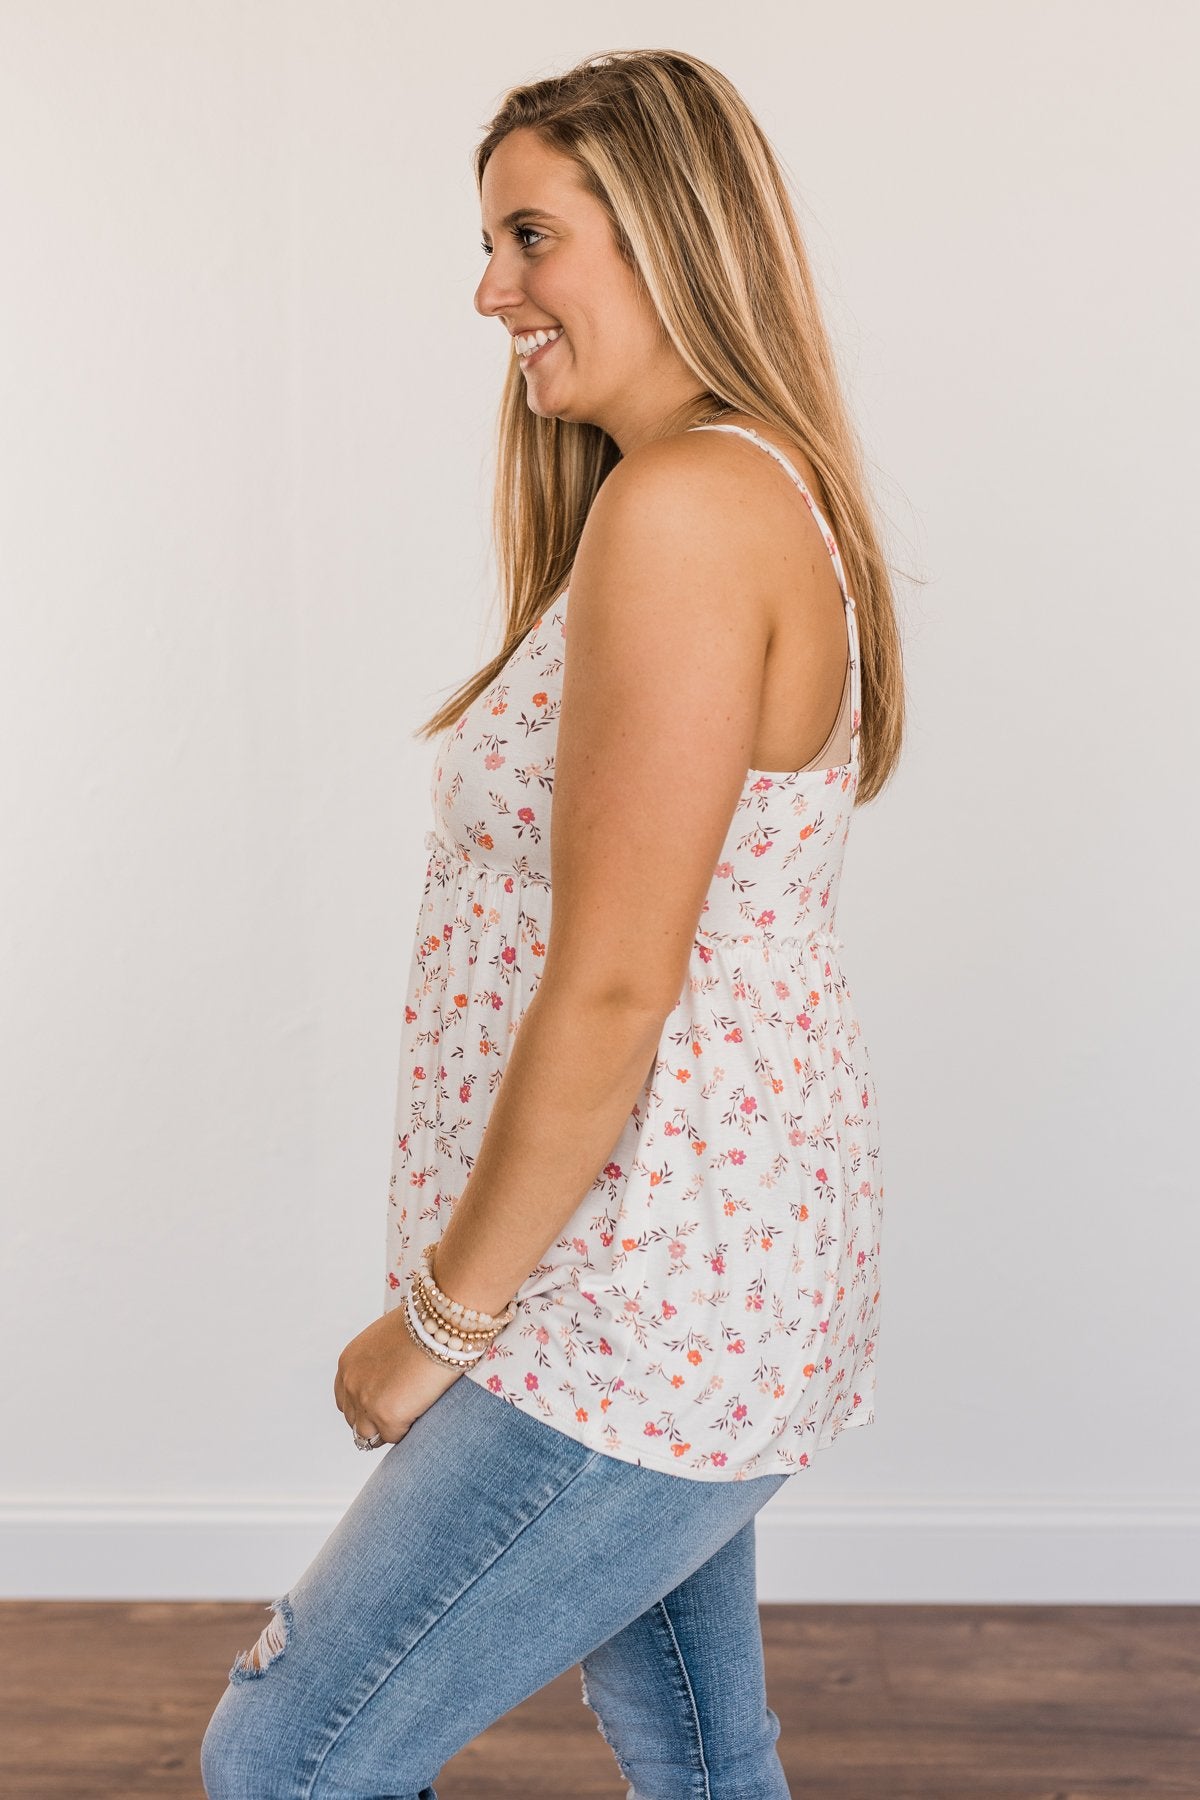 Find Me In The Garden Floral Tank Top- Ivory